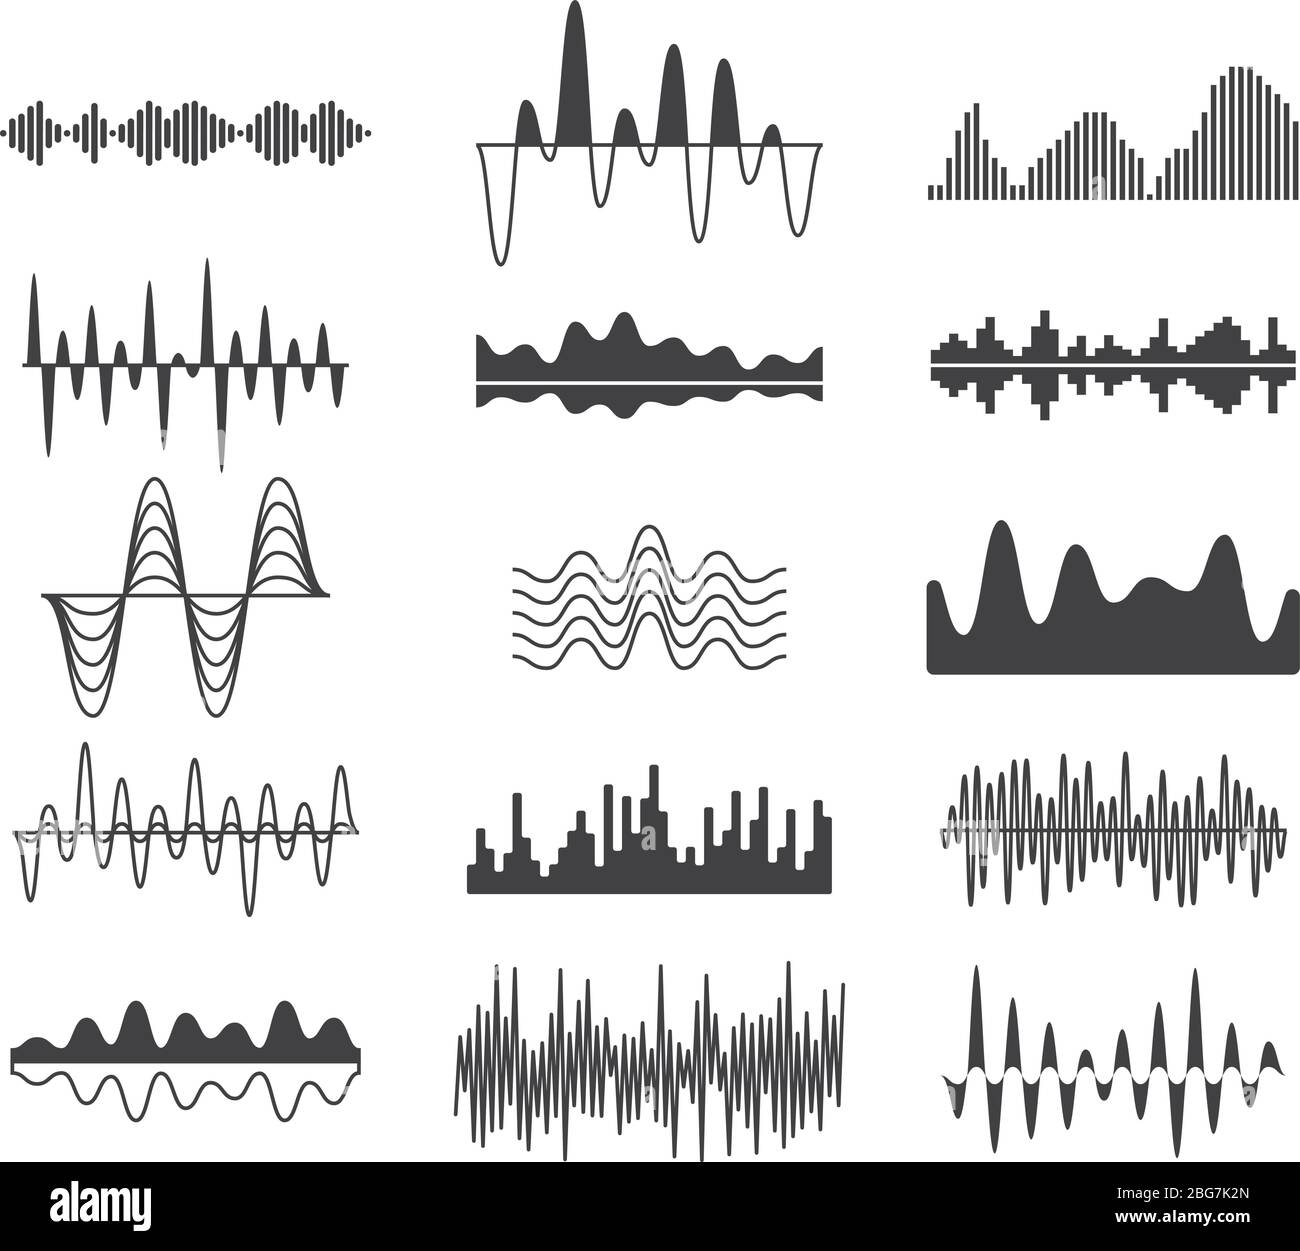 Sound frequency waves. Analog curved signal symbols. Audio track music equalizer forms, soundwaves signals vector set. Wavy signal electronic equalize Stock Vector